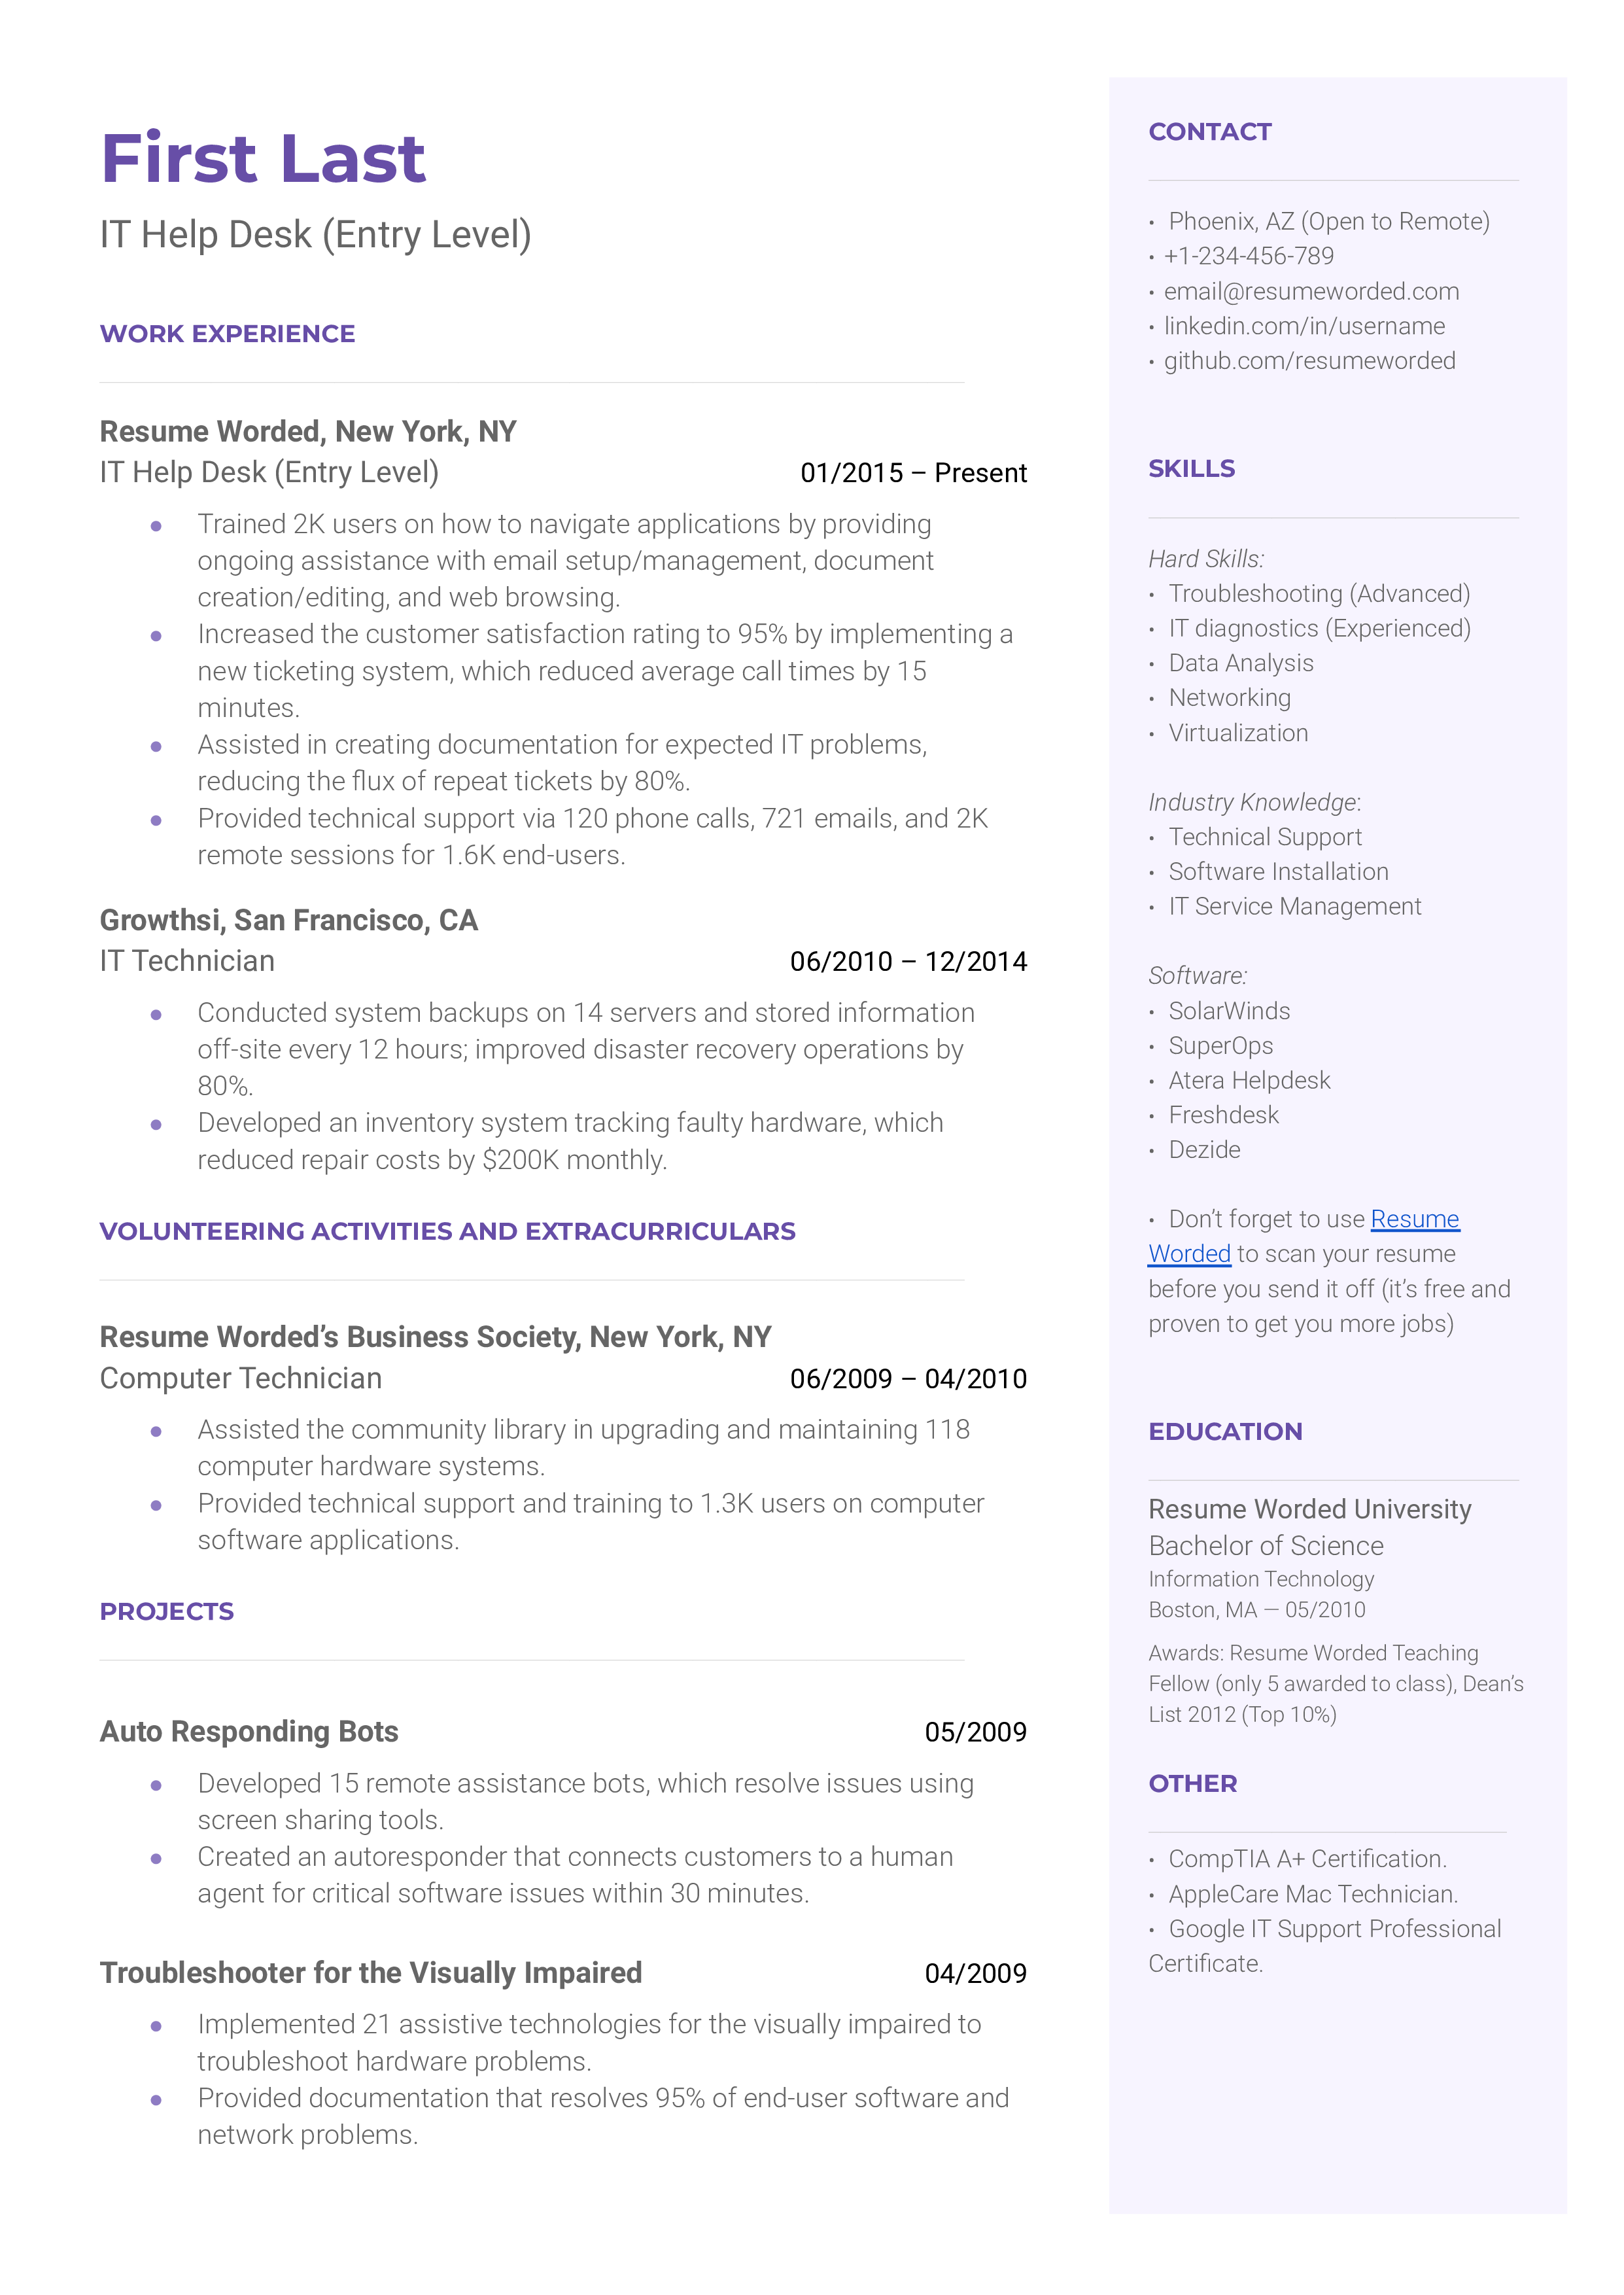 A IT help desk (entry-level) resume template that is tailored to the IT industry 